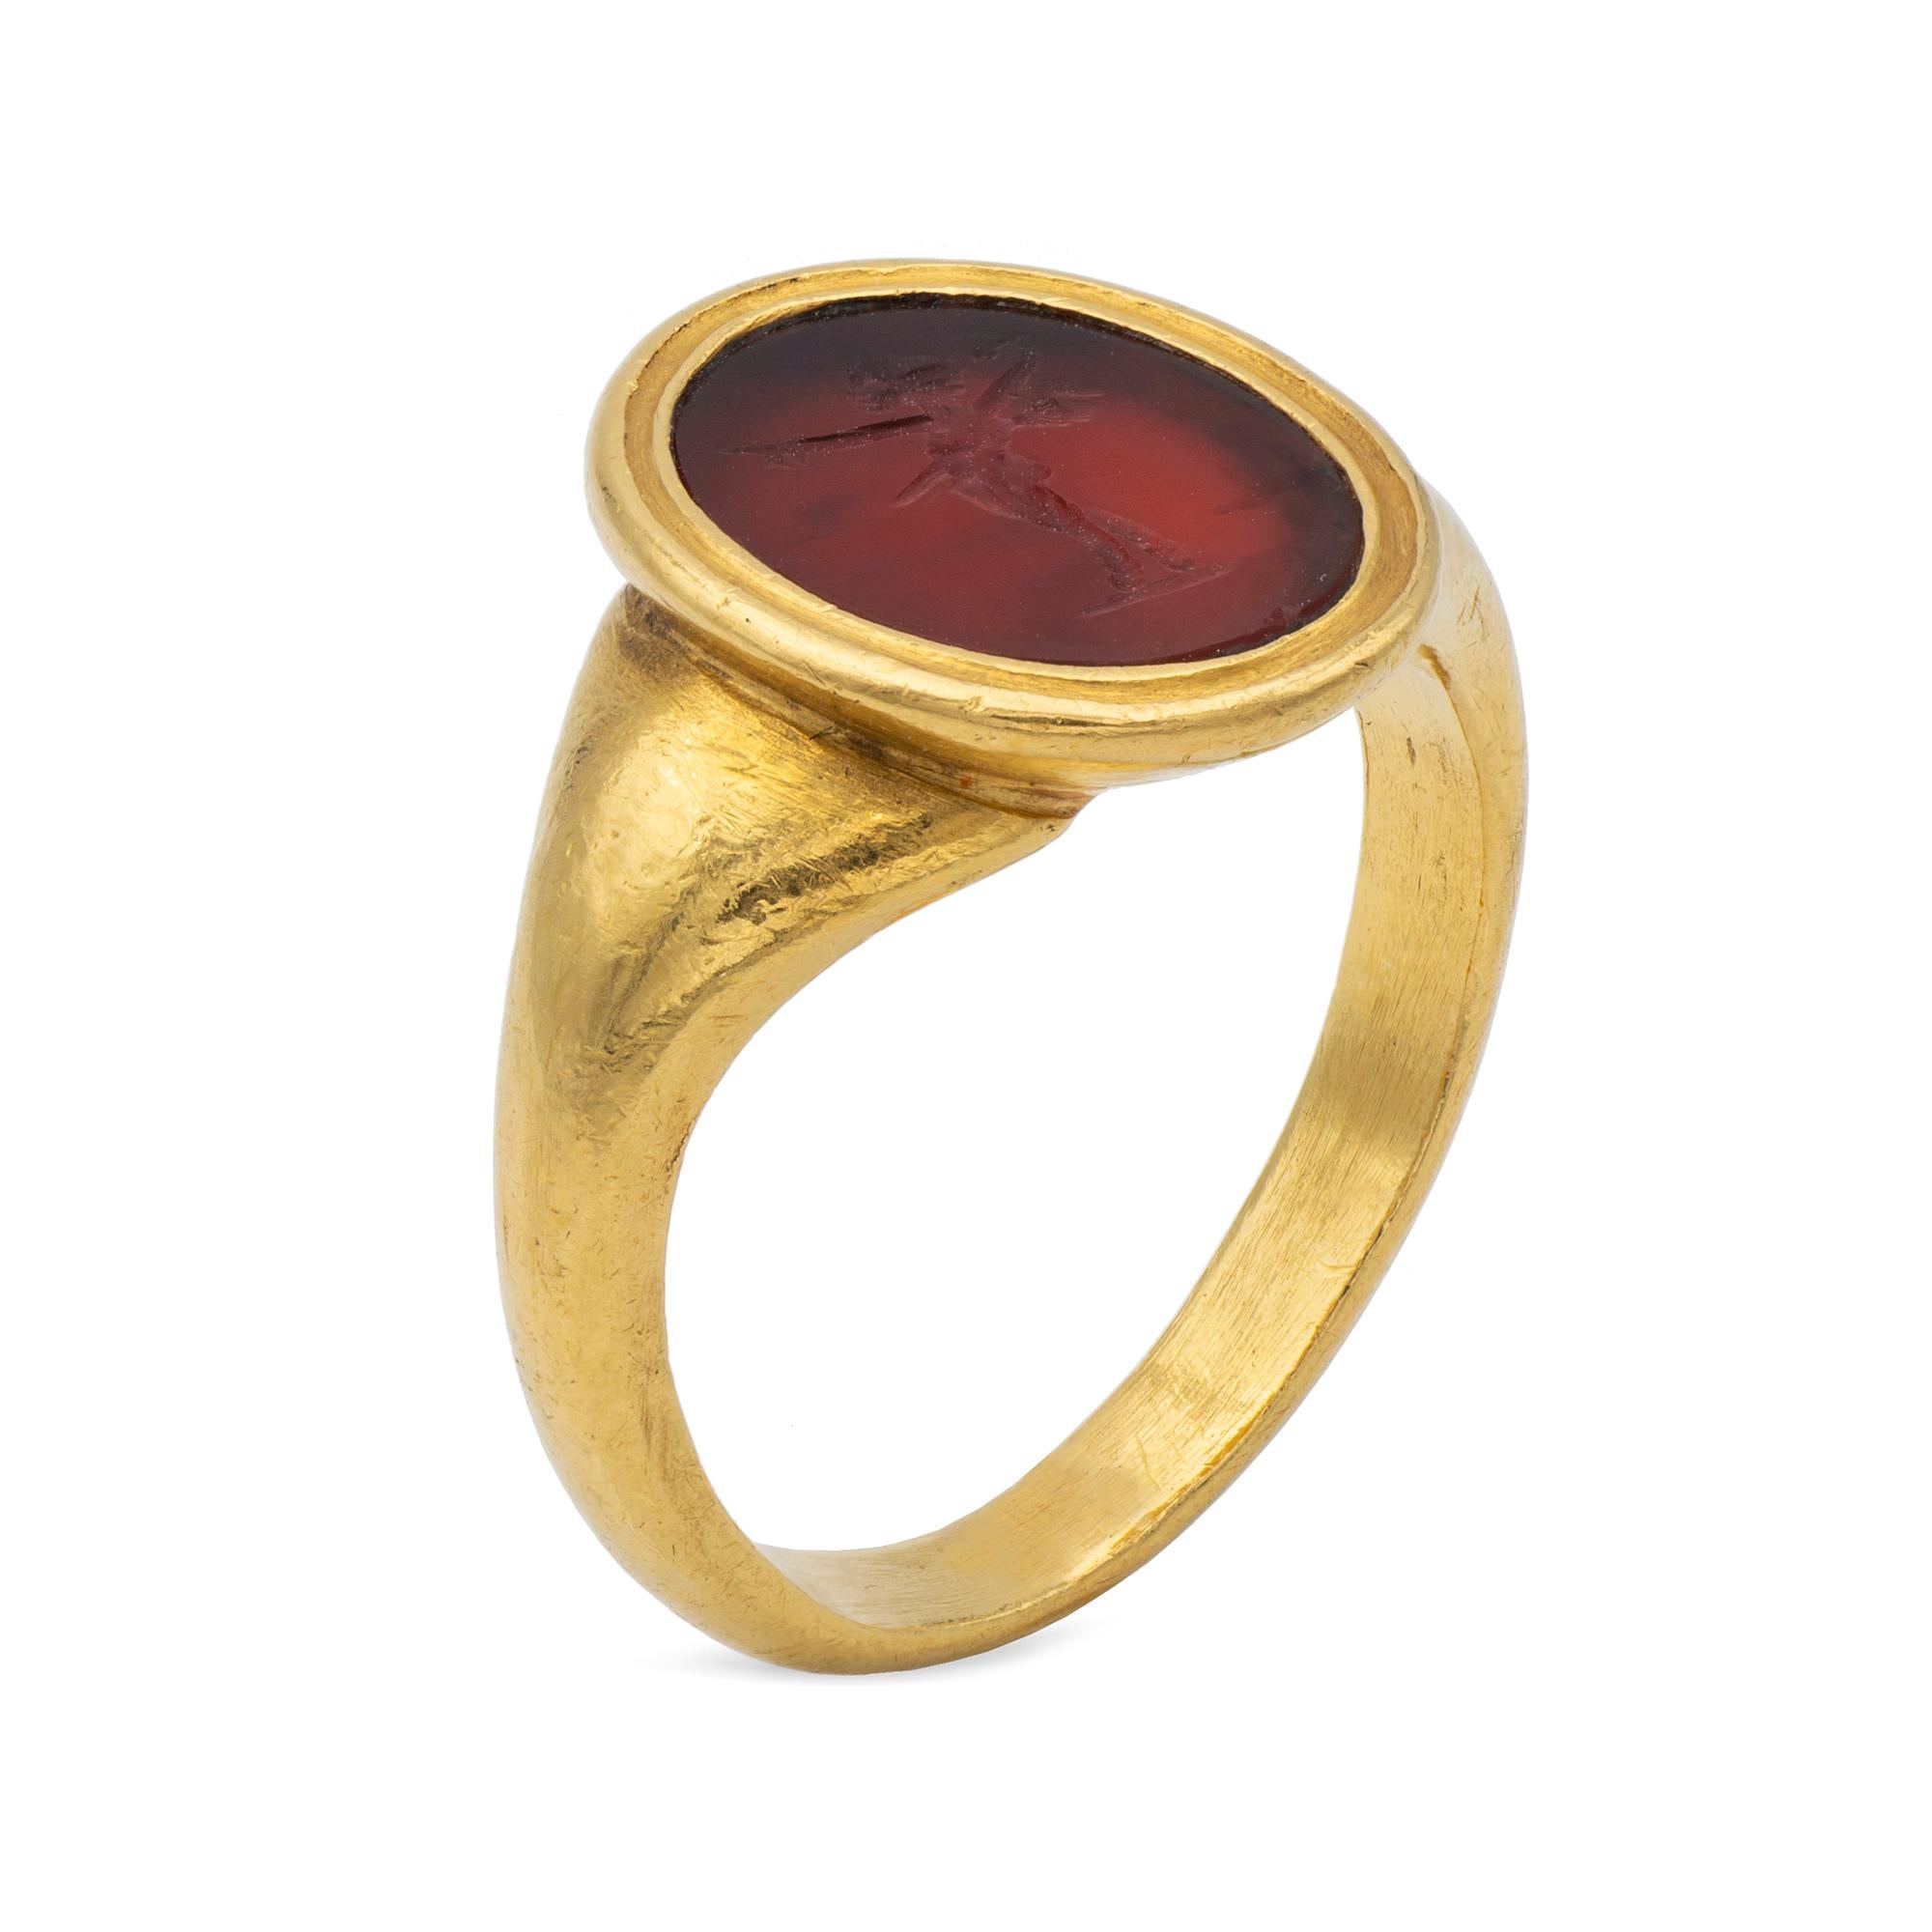 A Georgian hardstone intaglio ring, the oval cornelian measuring 15x11mm, depicting the figure of Pan, rubover set within a yellow gold mount with banded detail to the ridge, to a tapered yellow gold shank, circa 1800, finger size V, gross weight